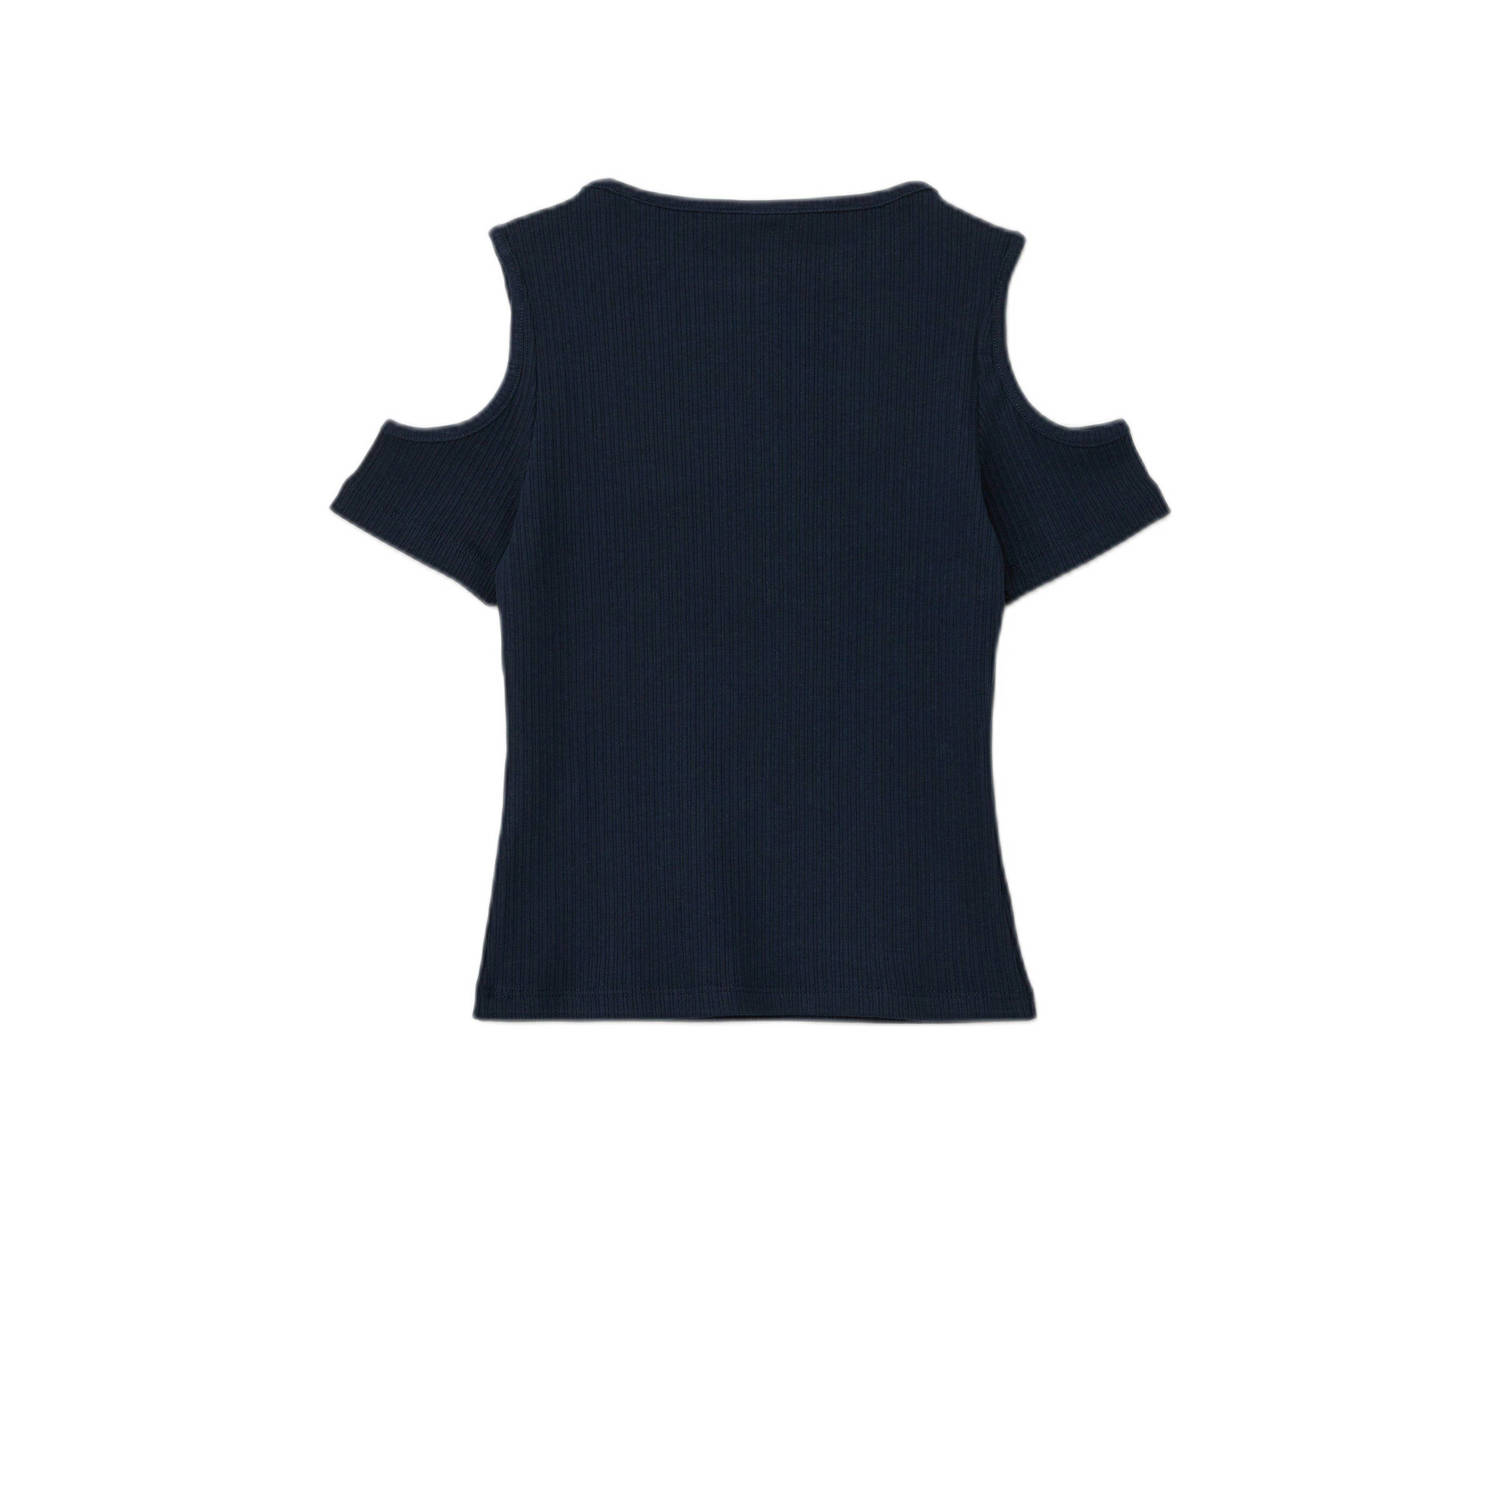 s.Oliver T-shirt donkerblauw